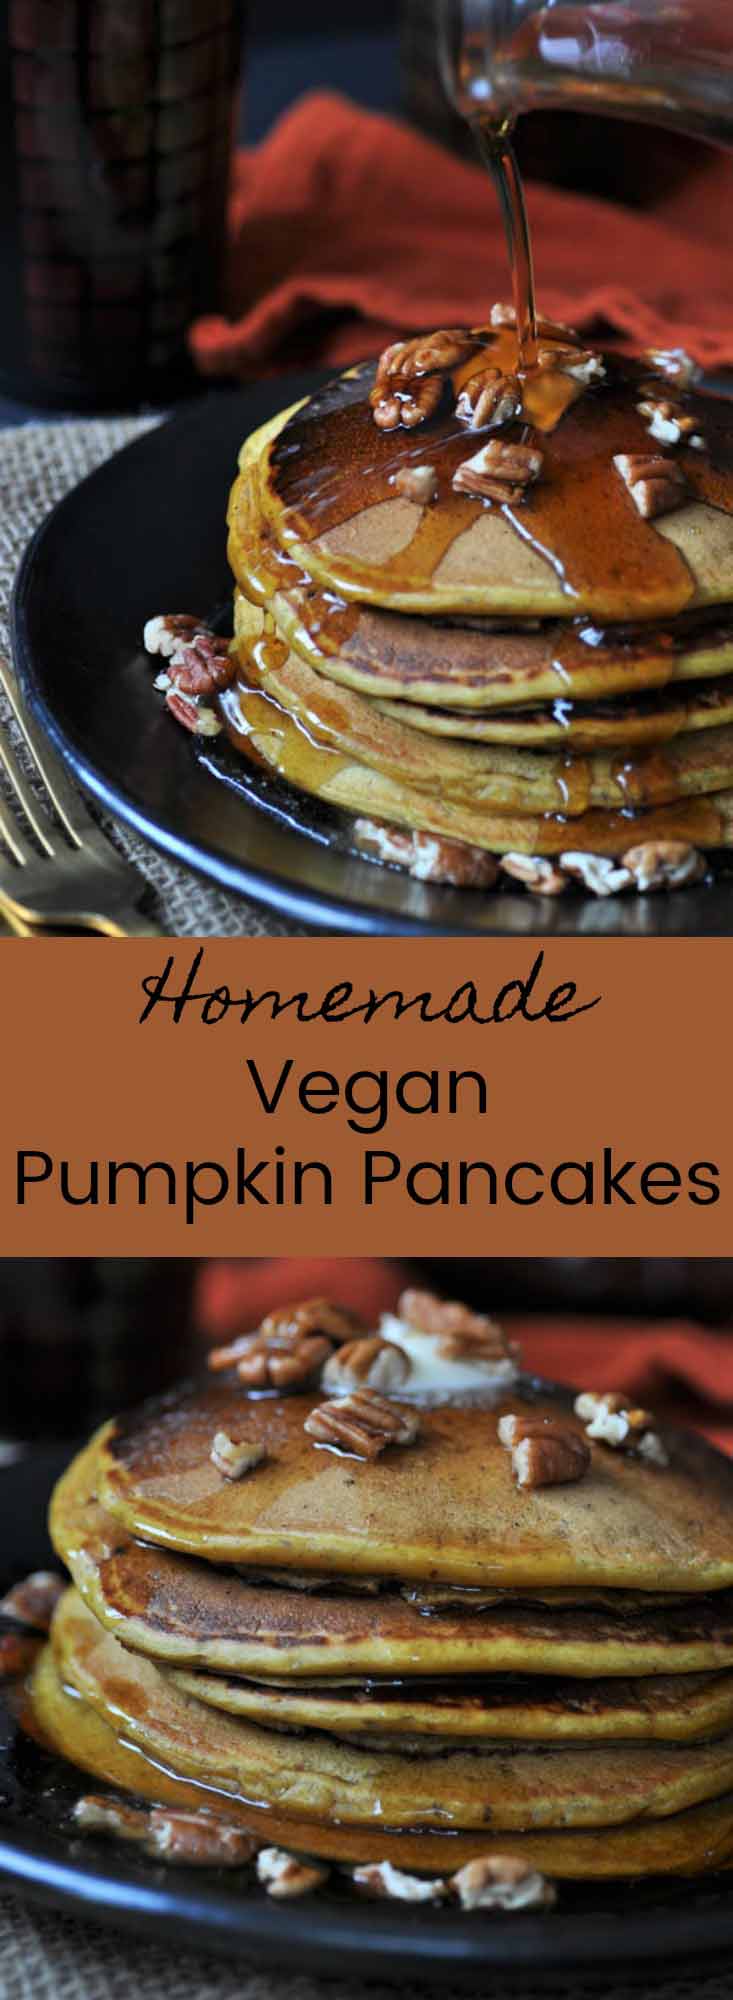 Vegan Pumpkin Pancakes! The perfect fall breakfast. Sprinkle with pecans and serve for your holiday meal.